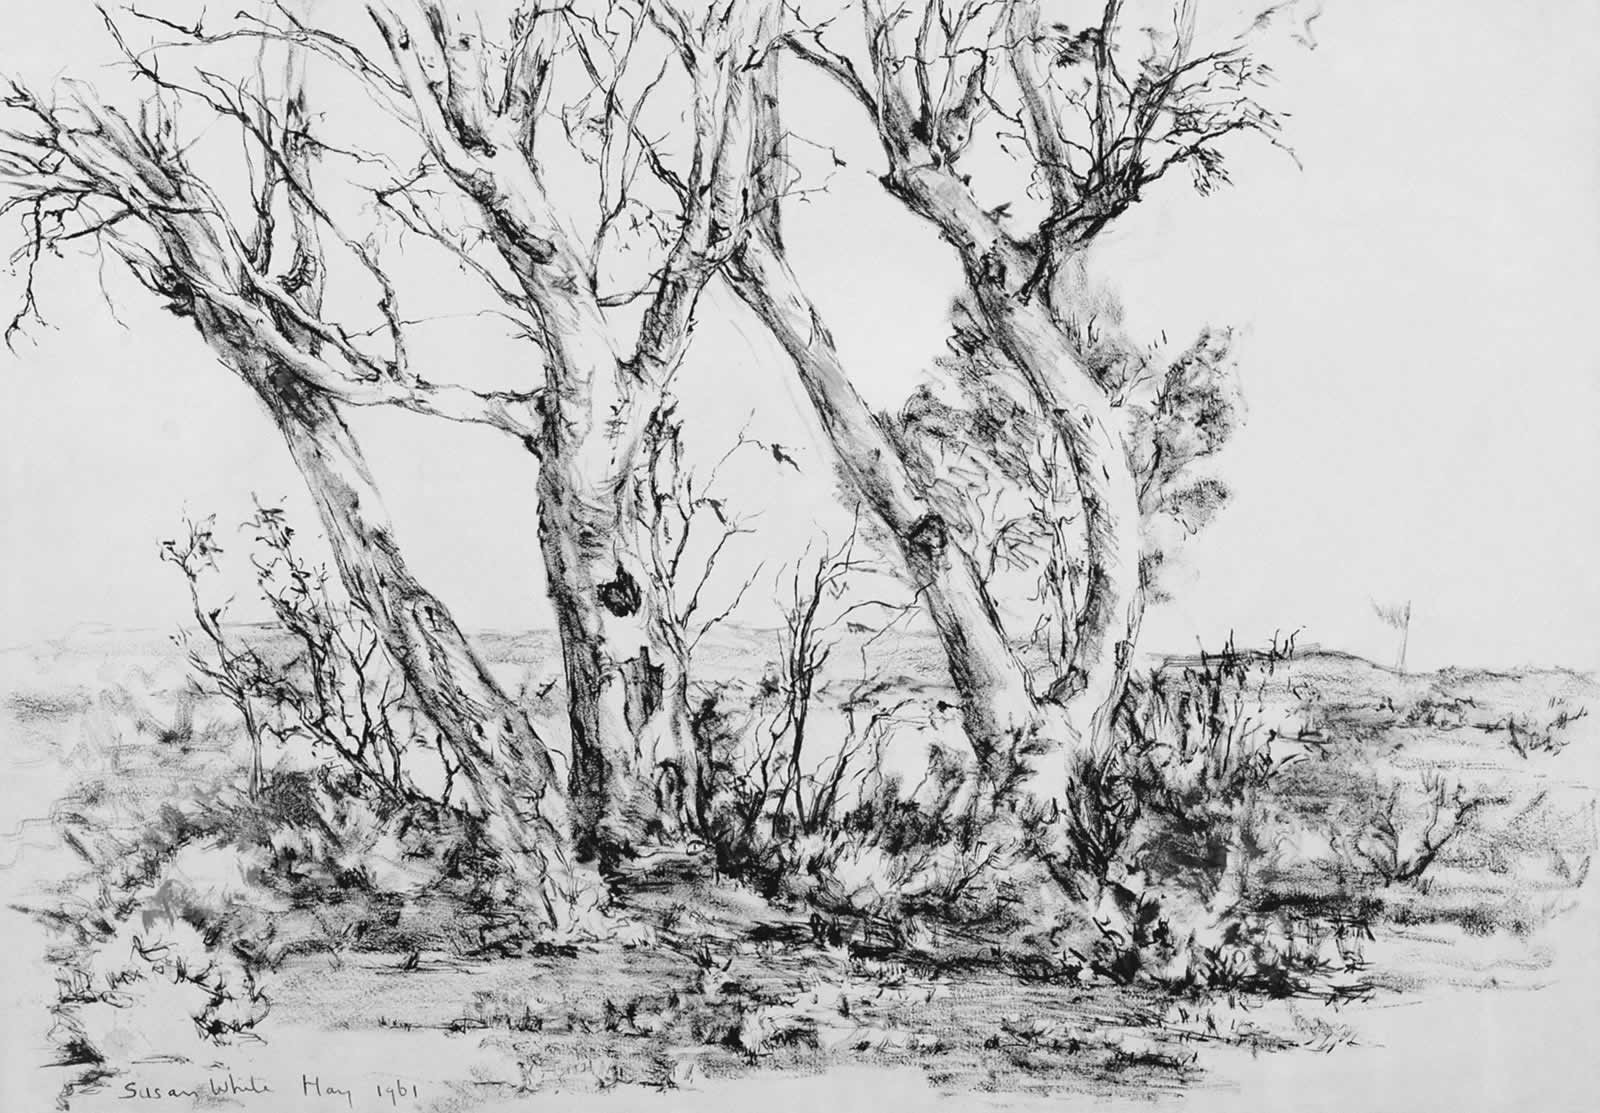 Outback Gums and Saltbush (Stephens Creek) / Trees by Susan Dorothea White